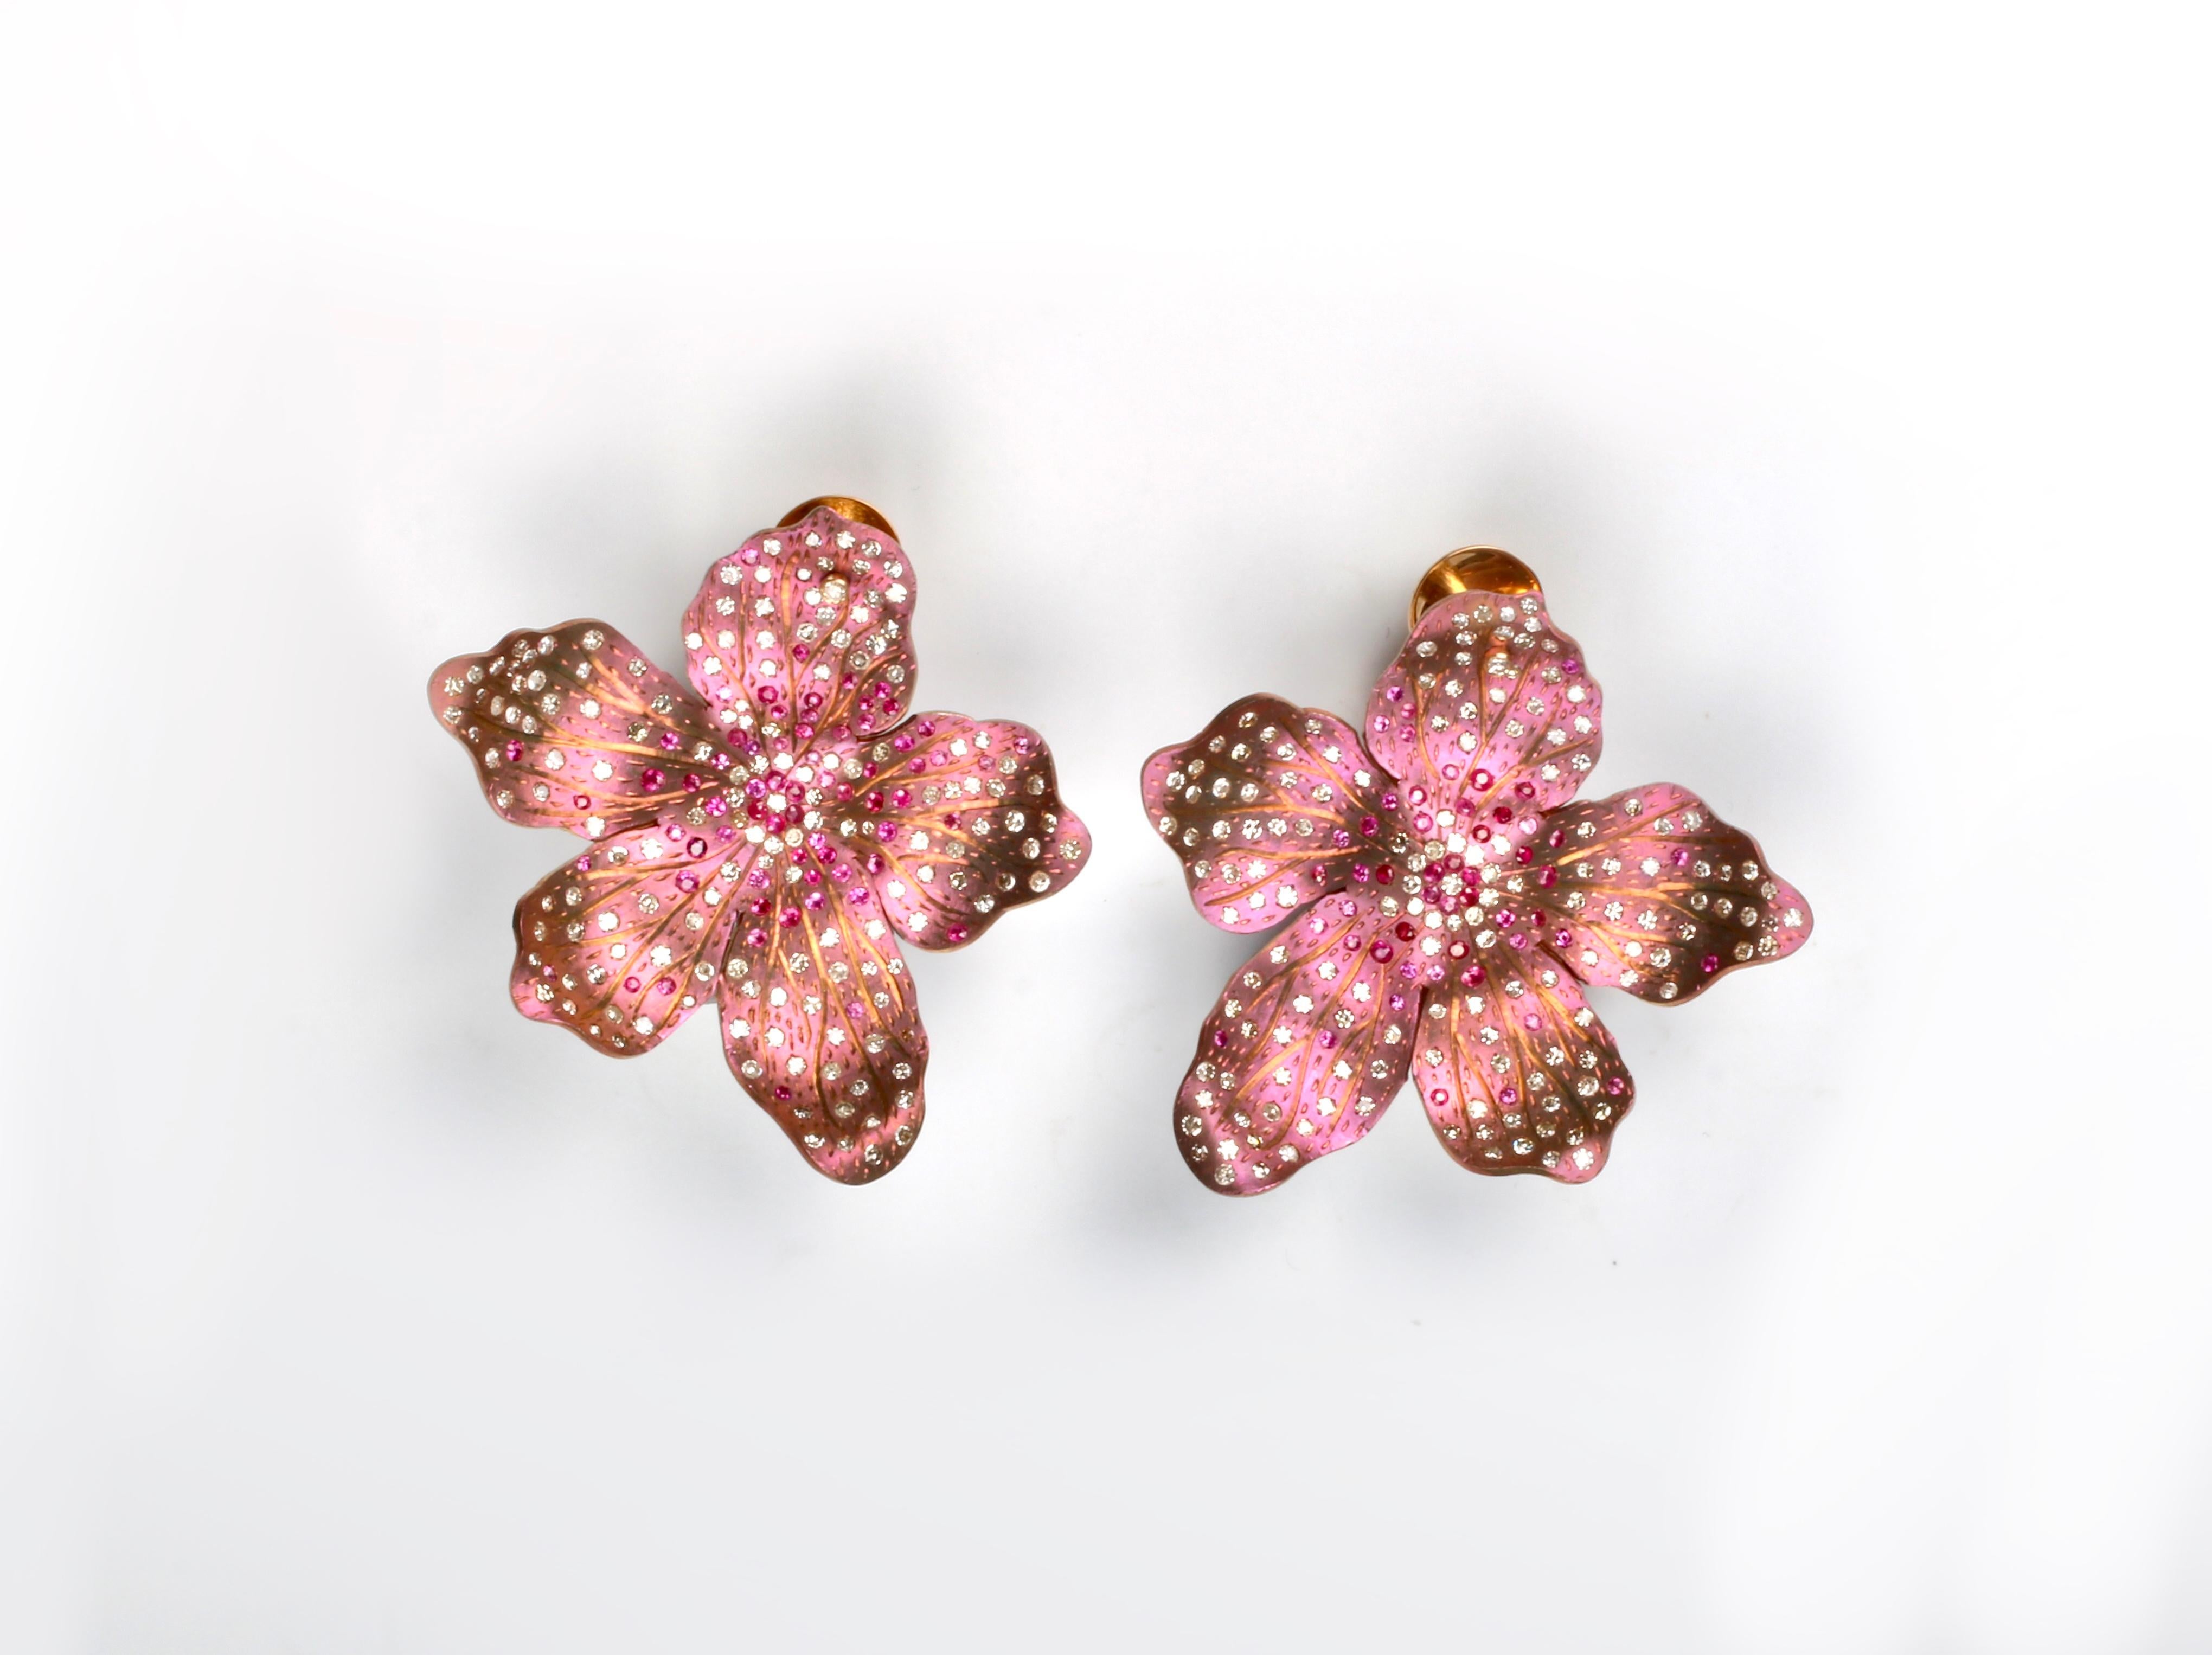 Roseus Periwinkle Titanium Flower Earrings with Rubies and Diamonds

3 carats of diamonds and 1.20 carats of Rubies. 18kt Gold backs.